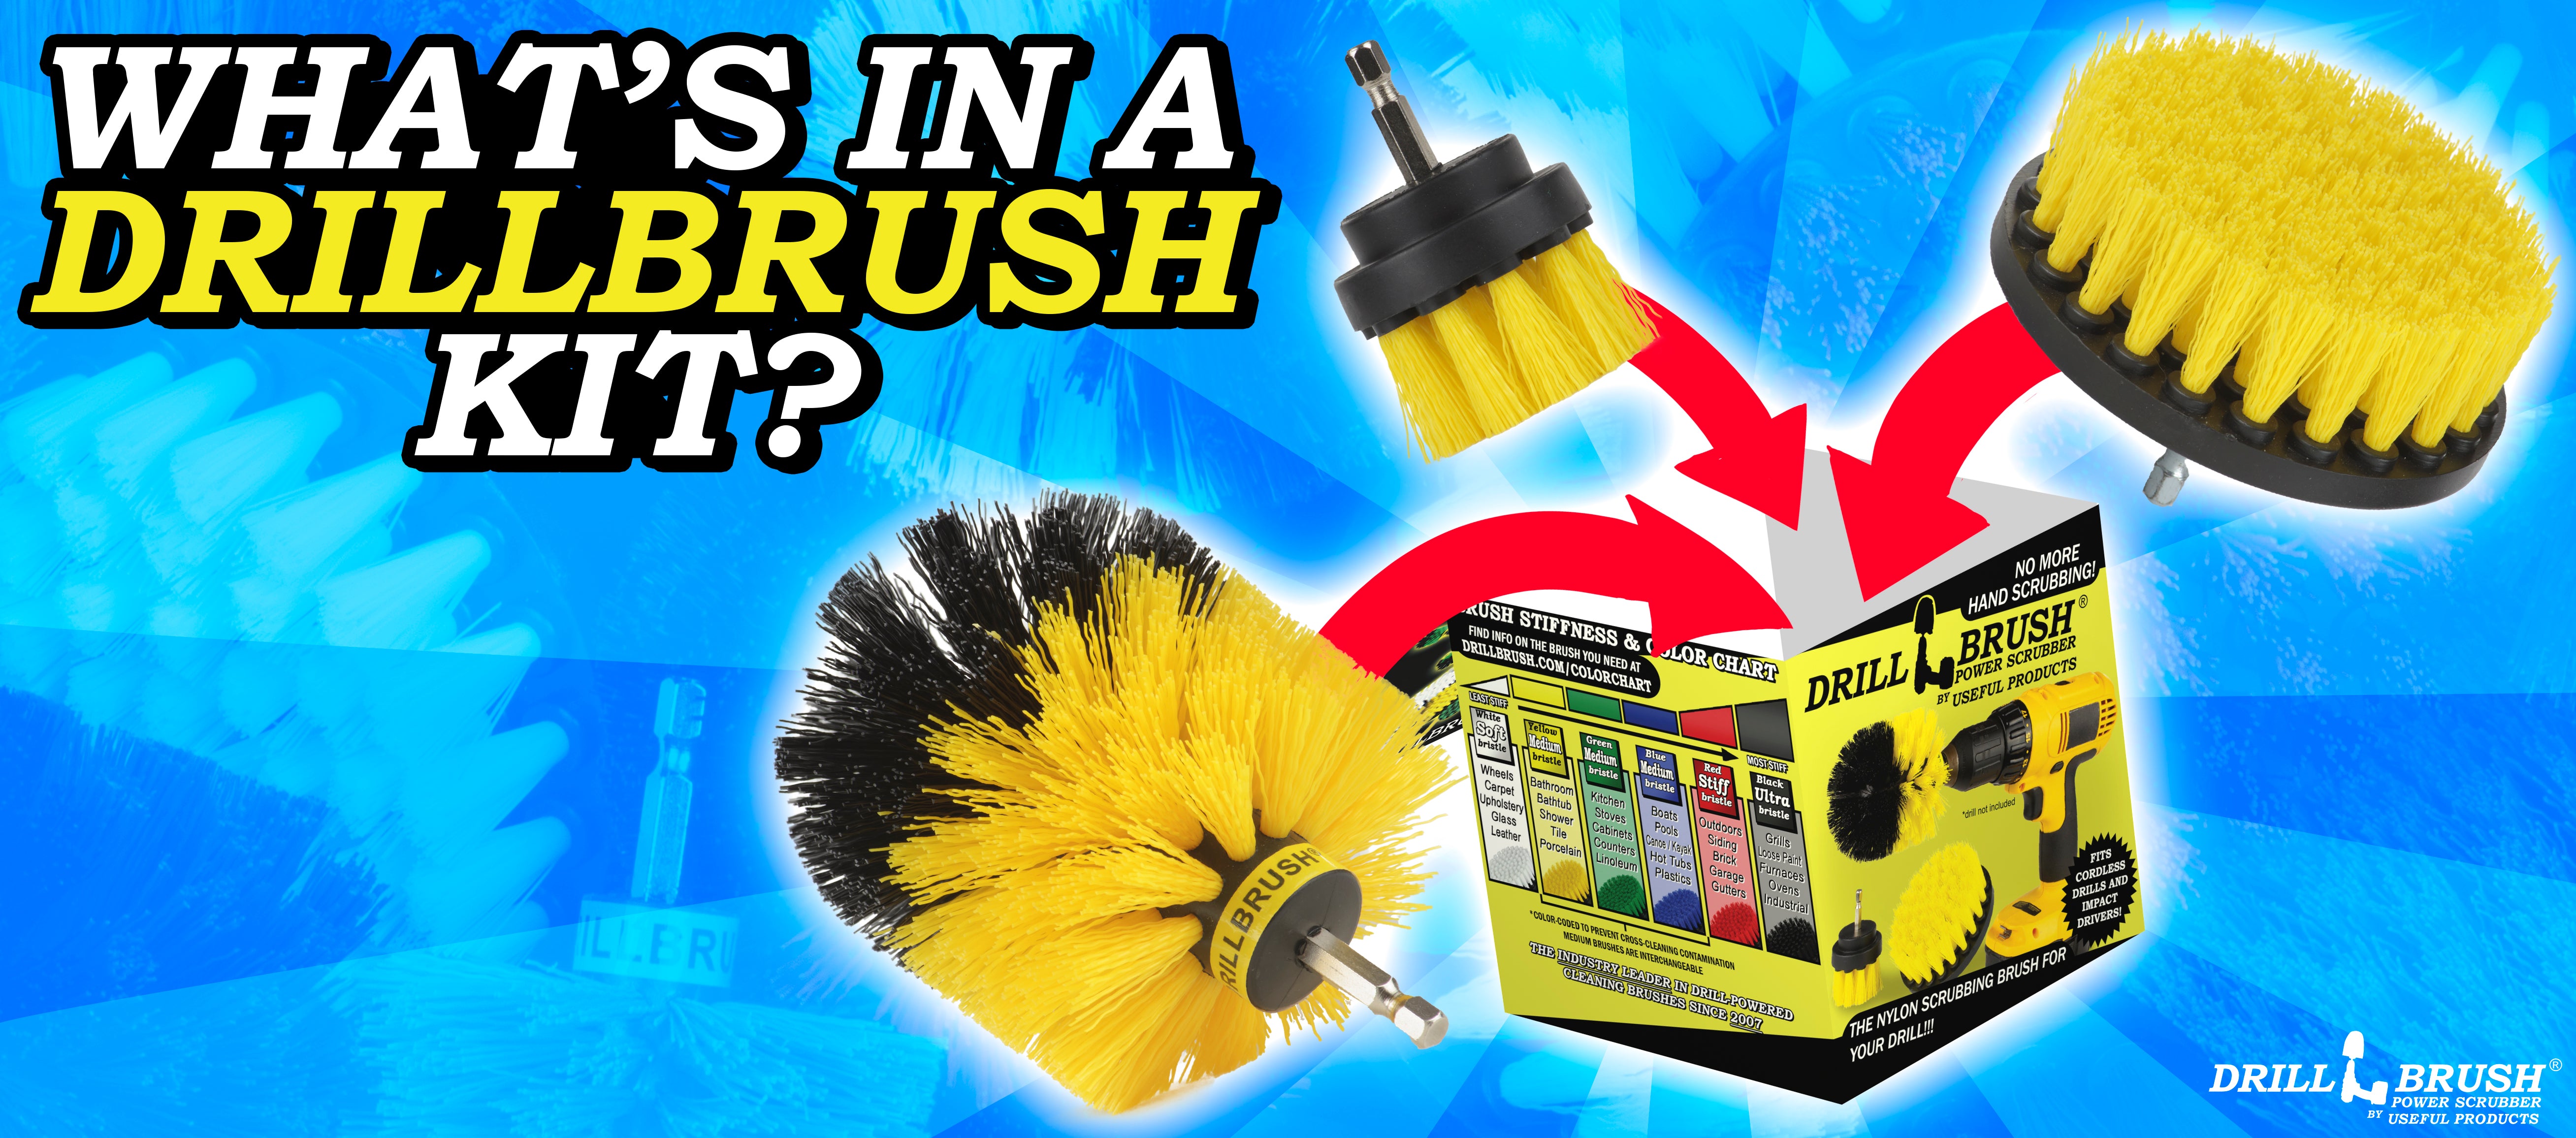 What’s In a Drillbrush Kit?